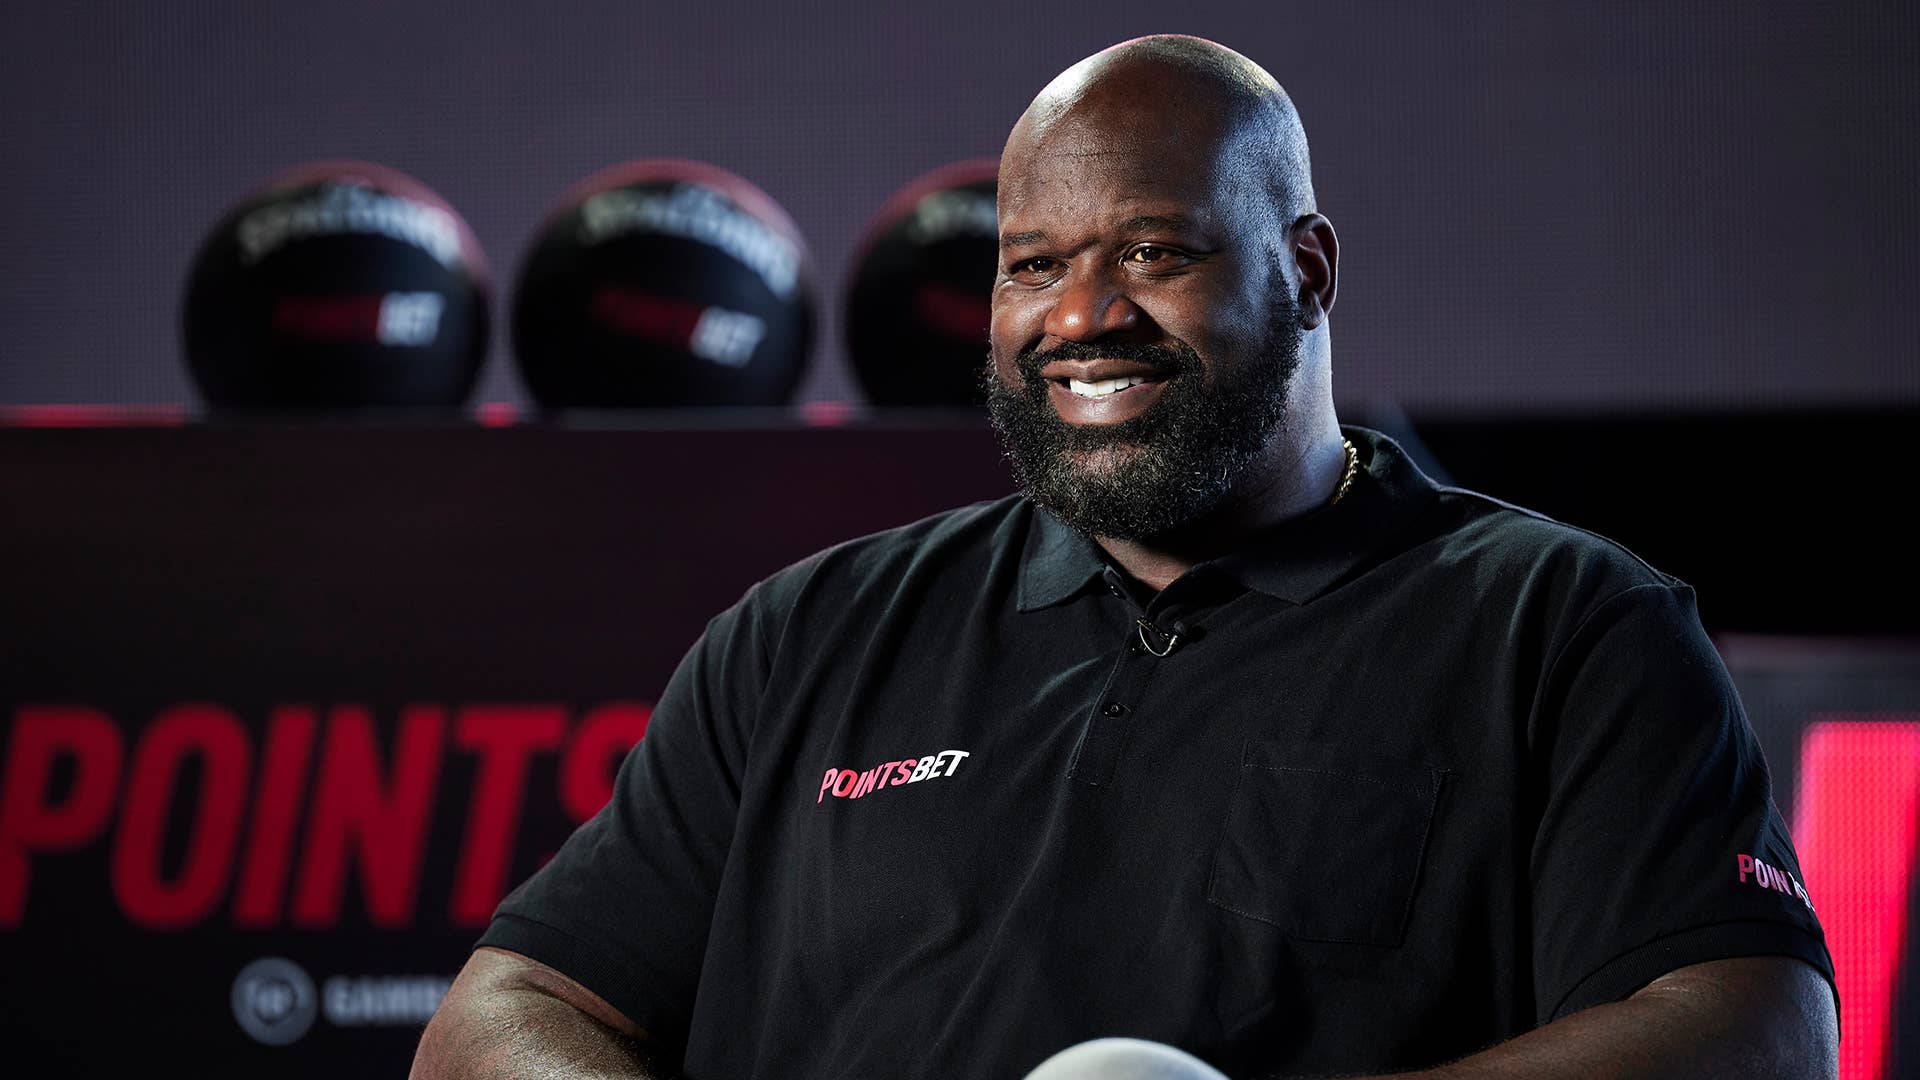 Shaquille O'Neal is interviewed during the PointsBet Built Differently Media Event